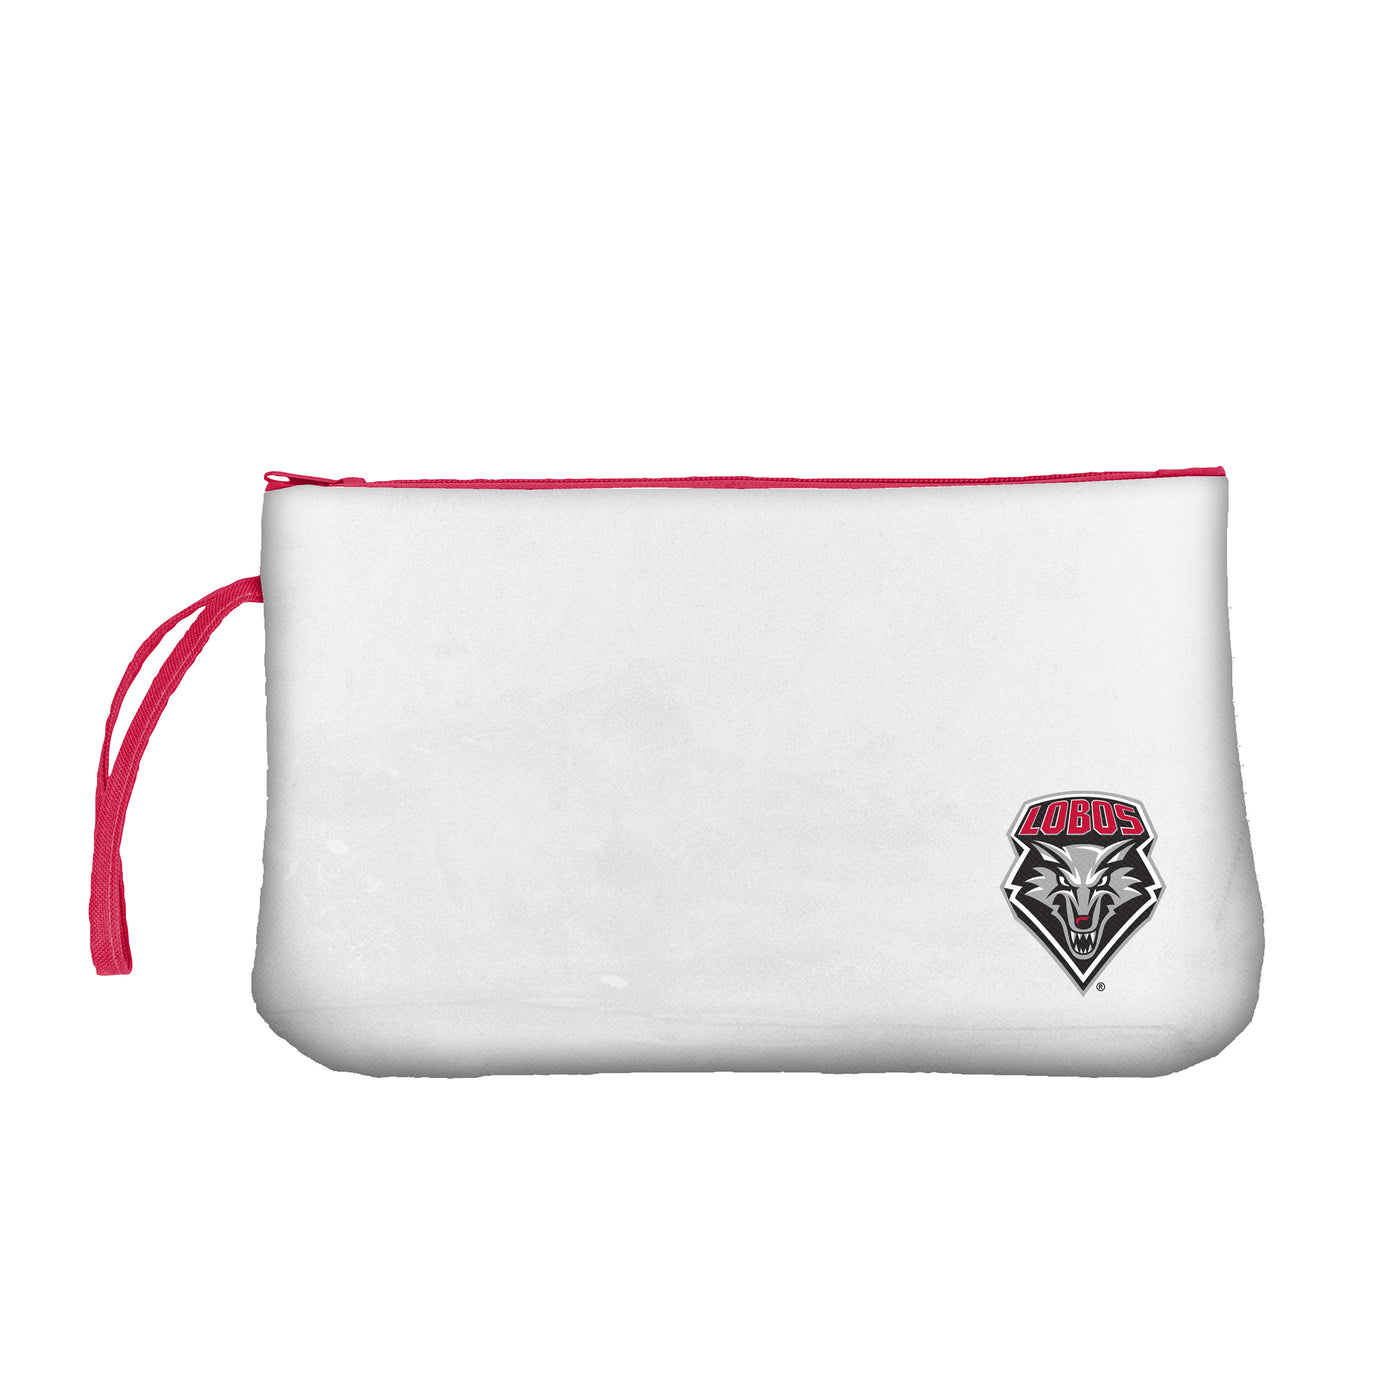 New Mexico Clear Wristlet